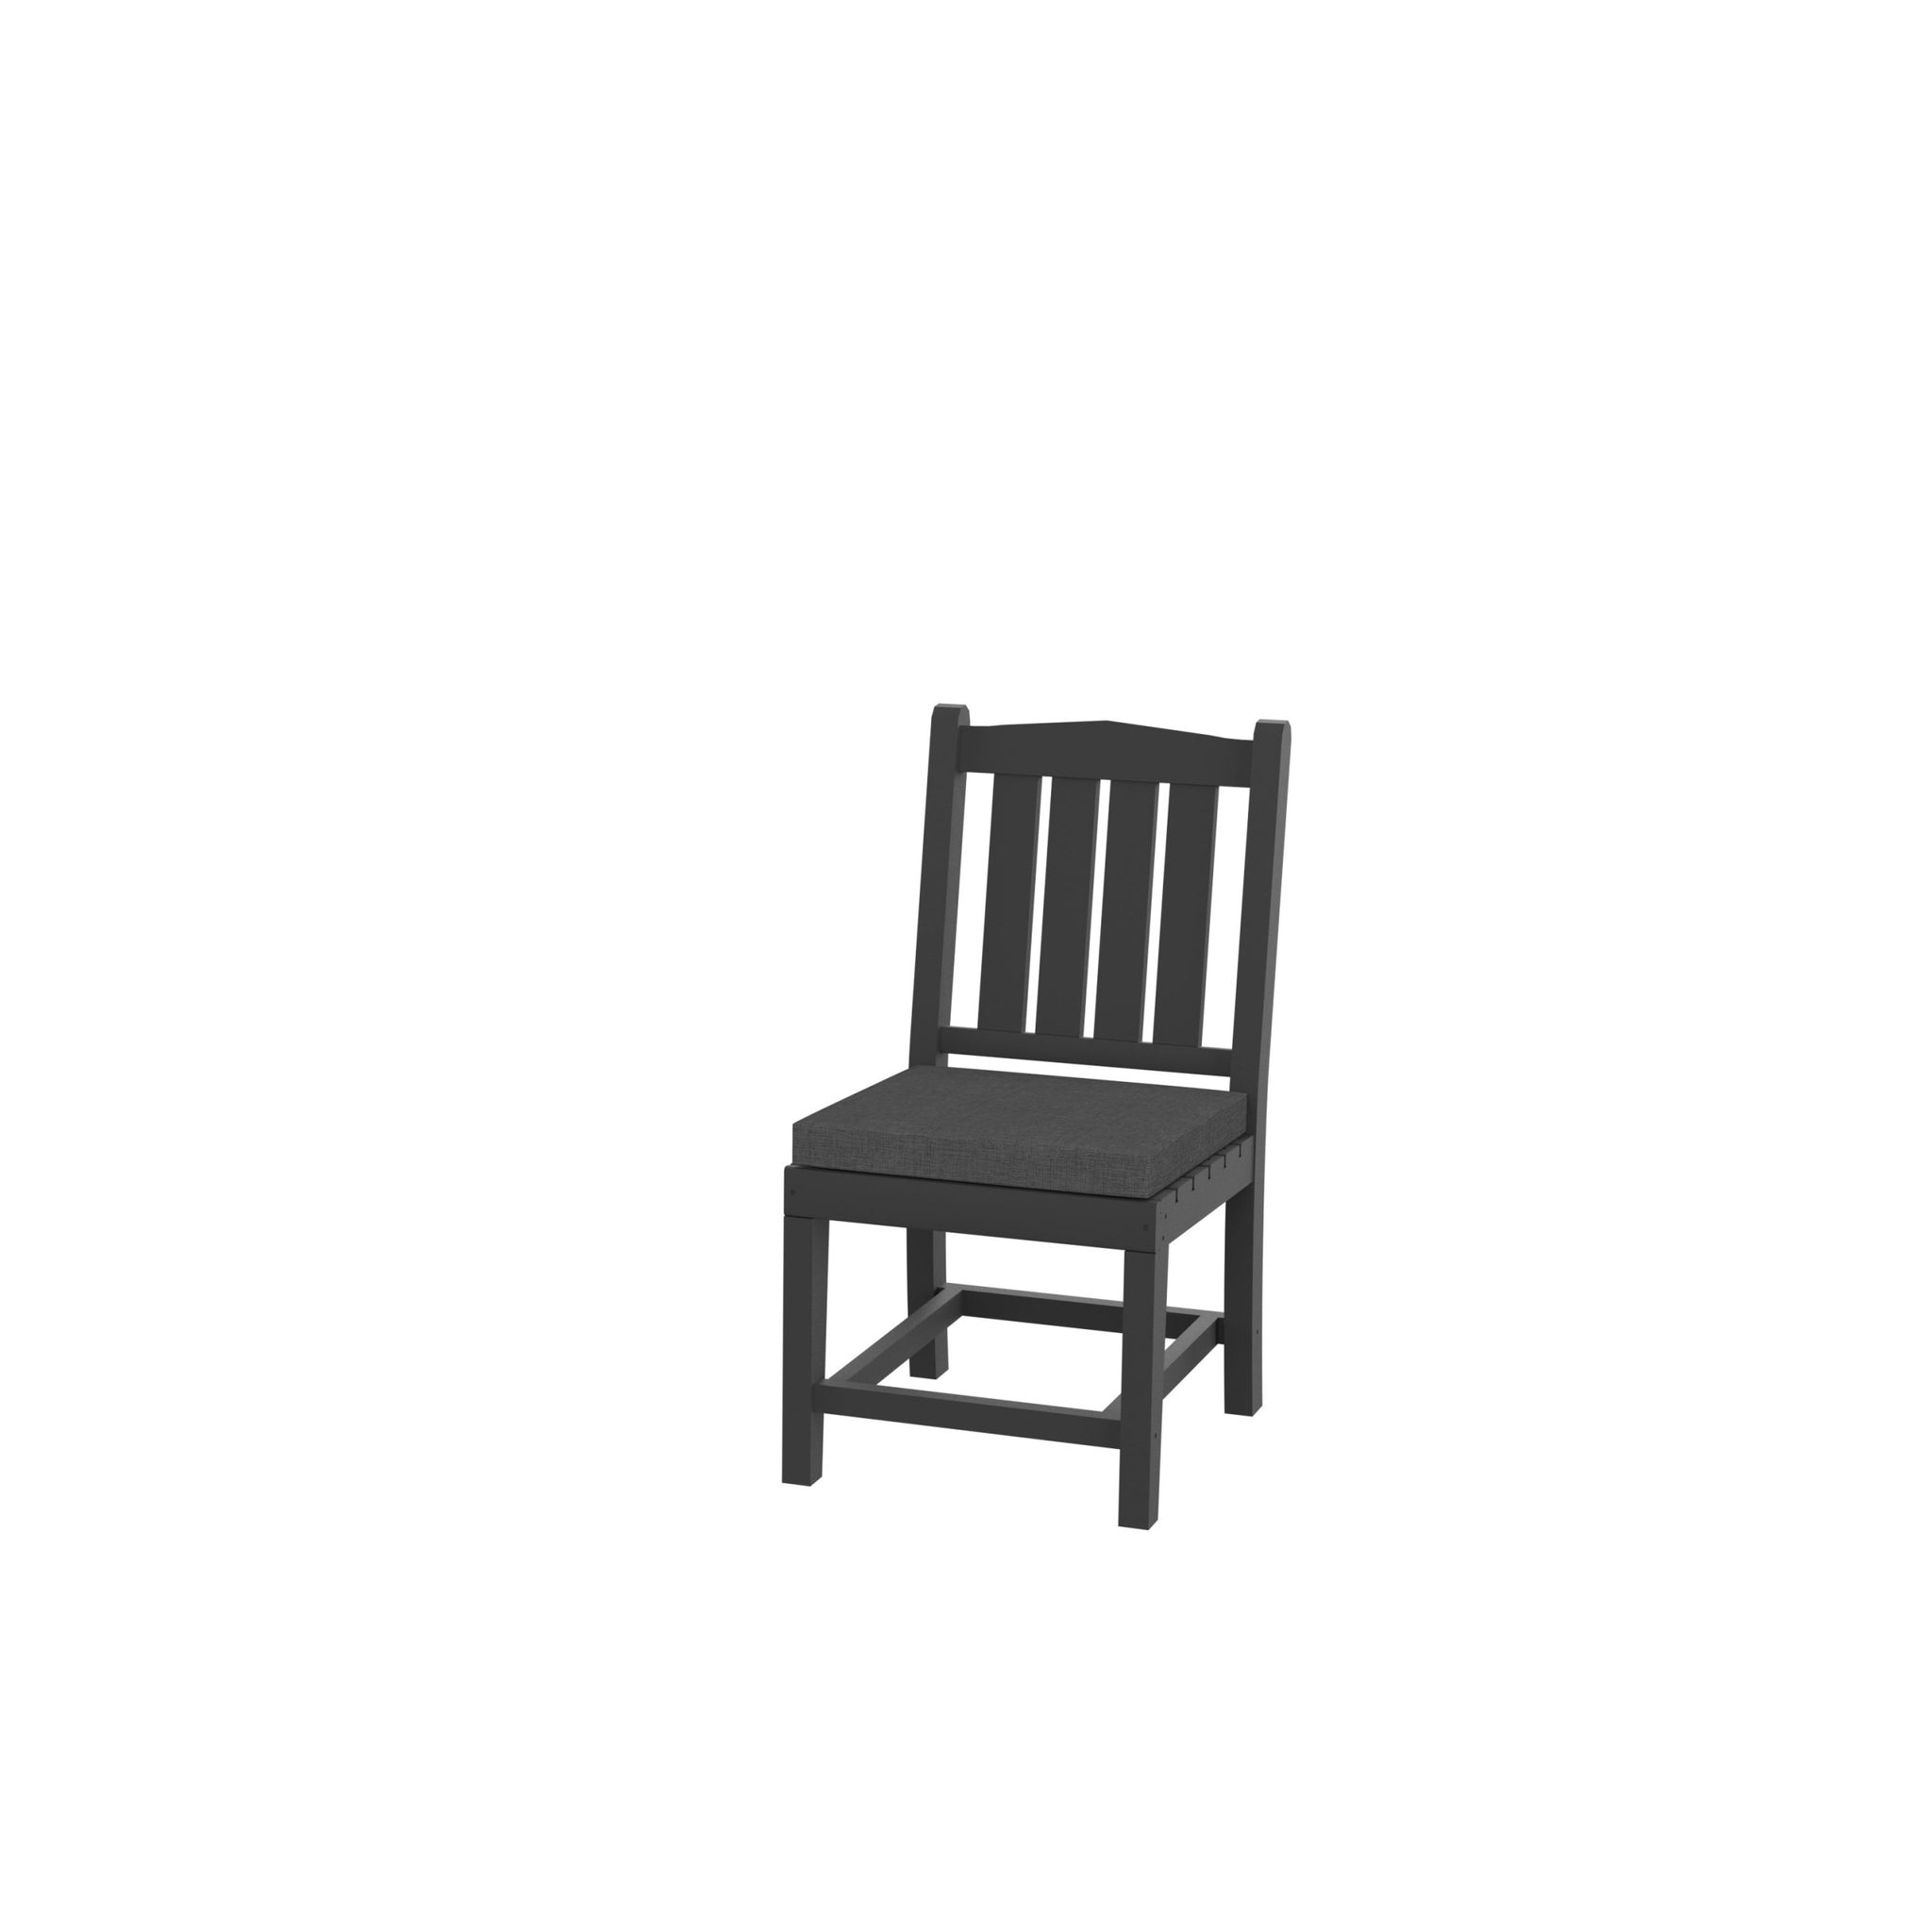 HDPE Dining Chair, Gray, With Cushion, No Armrest, Set gray-hdpe